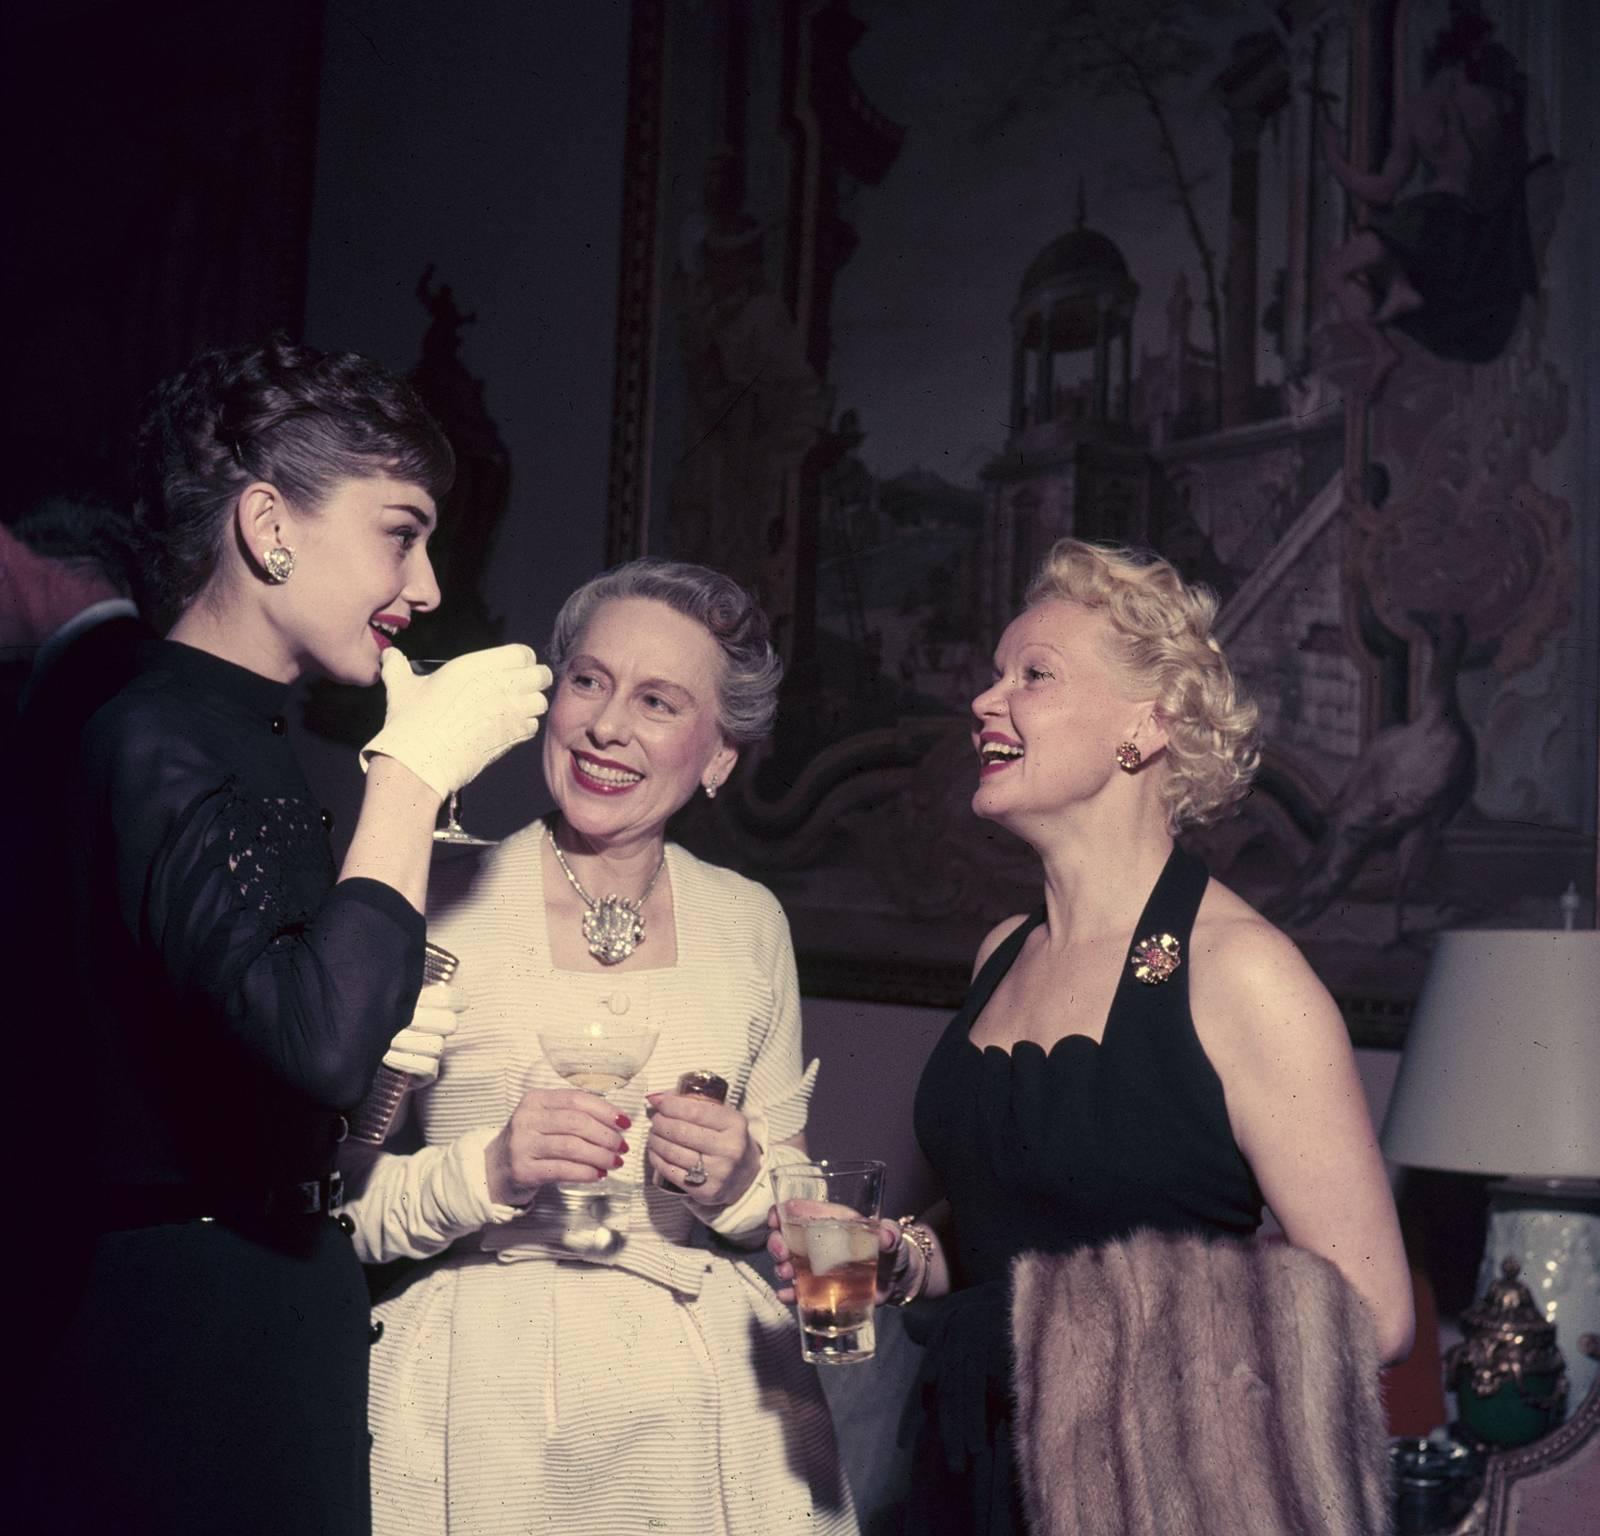 On the left film star Audrey Hepburn (1929 - 1993) talks with Mrs Grover Magnin (centre) and another guest at a party in San Francisco, 1953.

The beautiful and fashionable movie star and style icon dressed in her eponymous look; all in black with